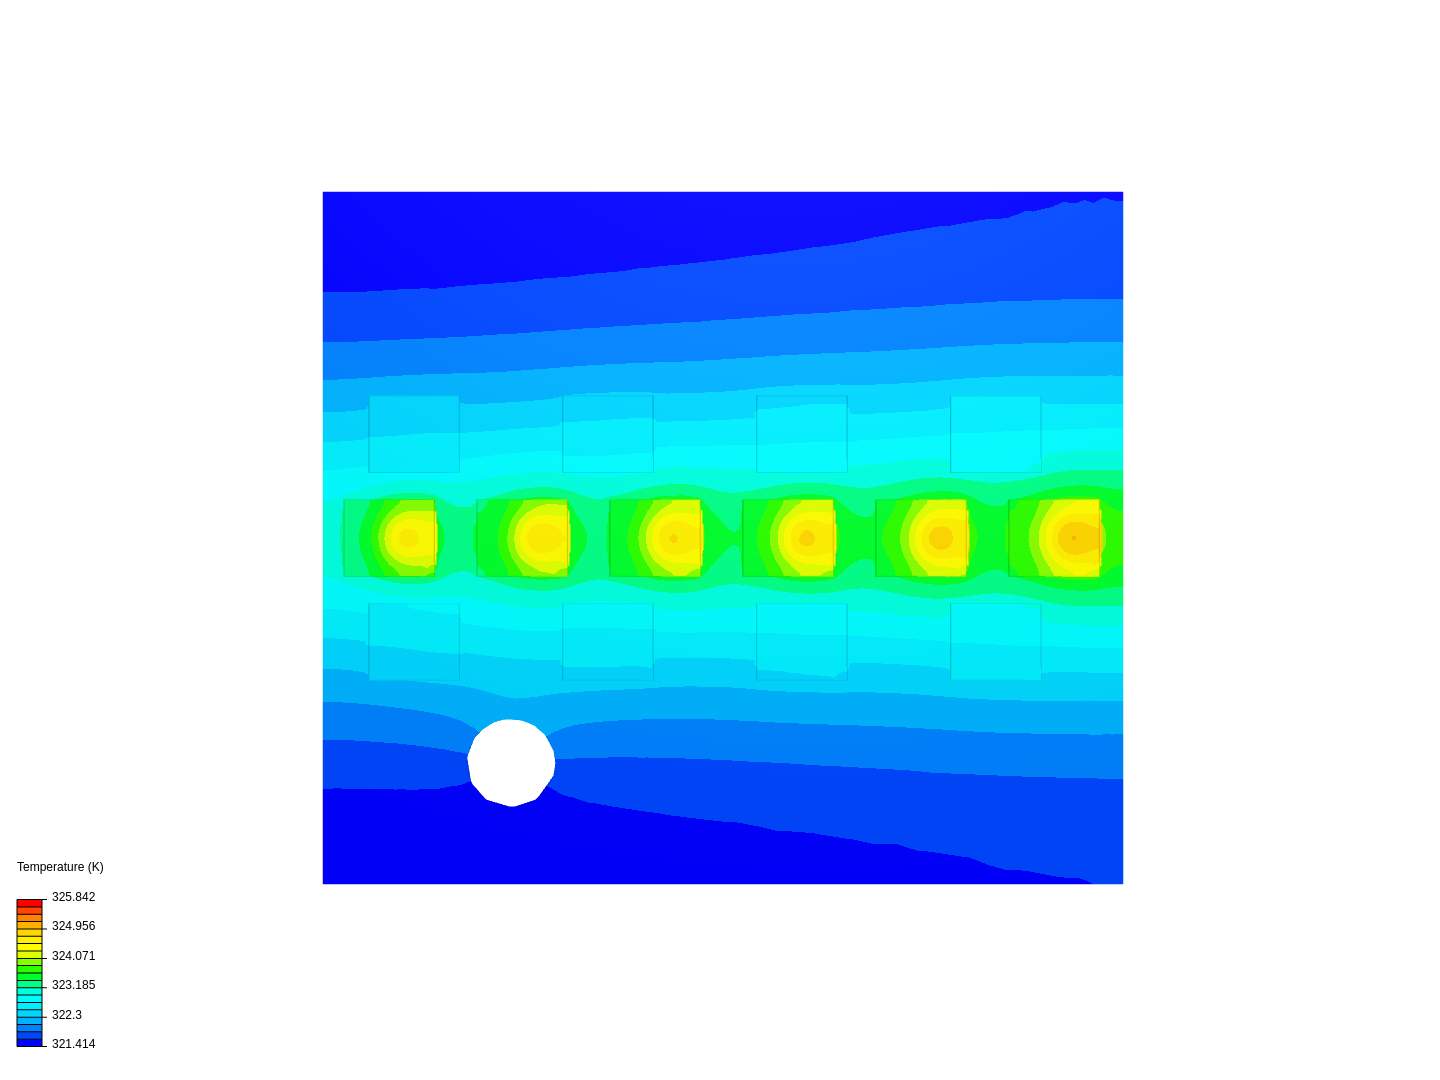 LED Thermal Simulation Simplified image